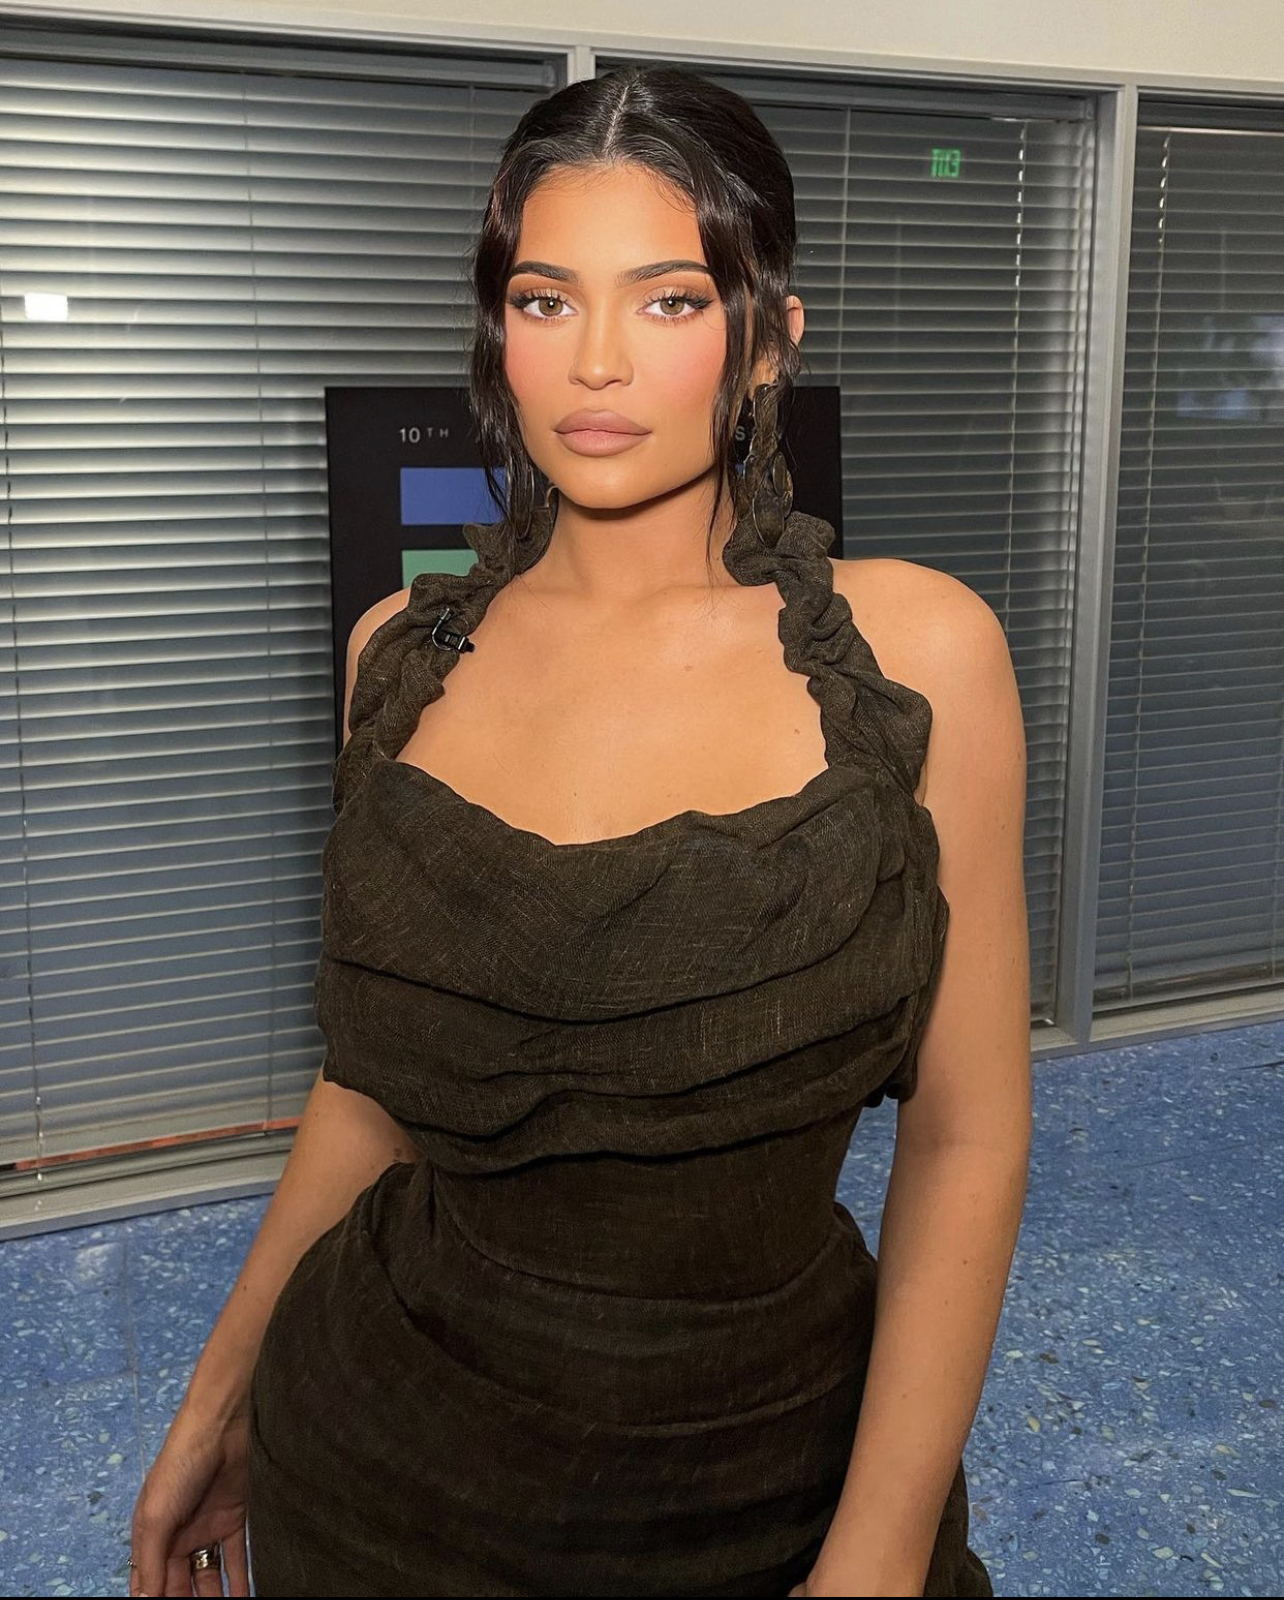 kylie-jenner-wore-vivienne-westwood-dress-keeping-up-with-the-kardashians-reunion